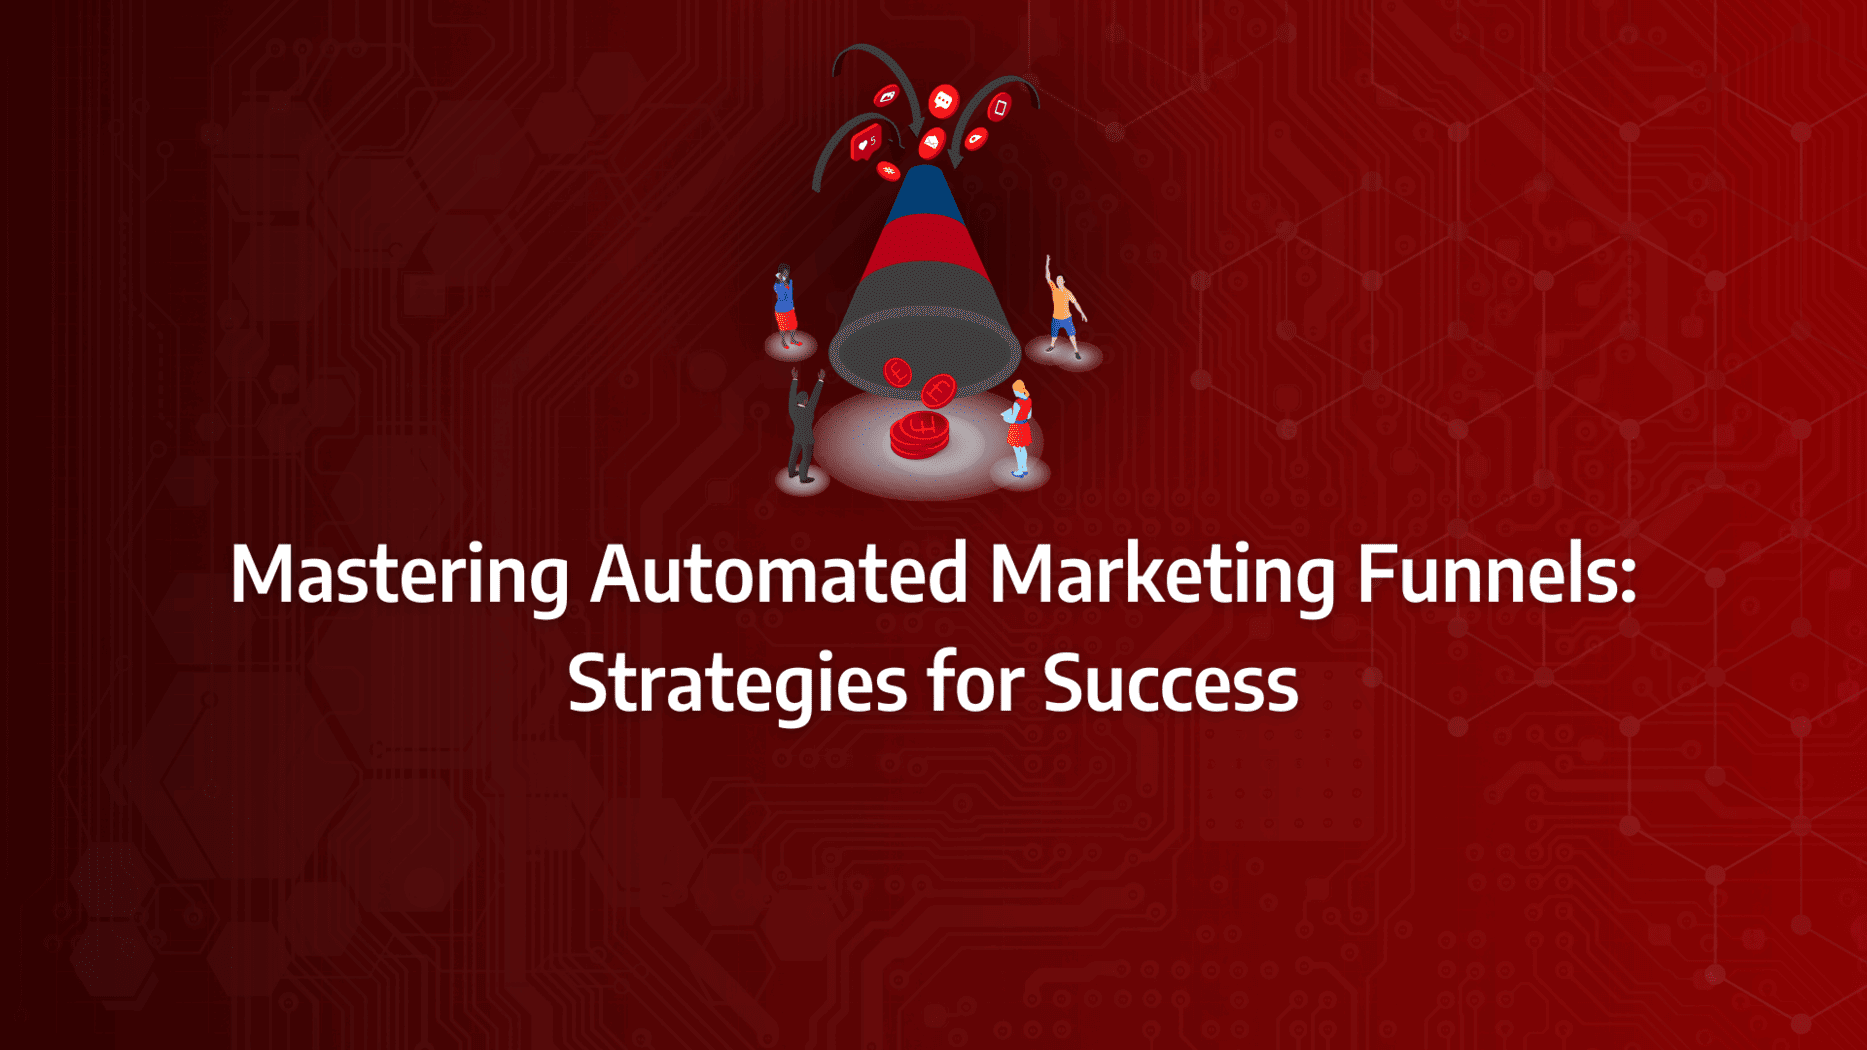 Tactics for Building an Automated Marketing Funnel to Increase Conversions: strategy framework diagram for funnel conversion rate, automated funnel system, automated sales funnel, sales funnel automation tools